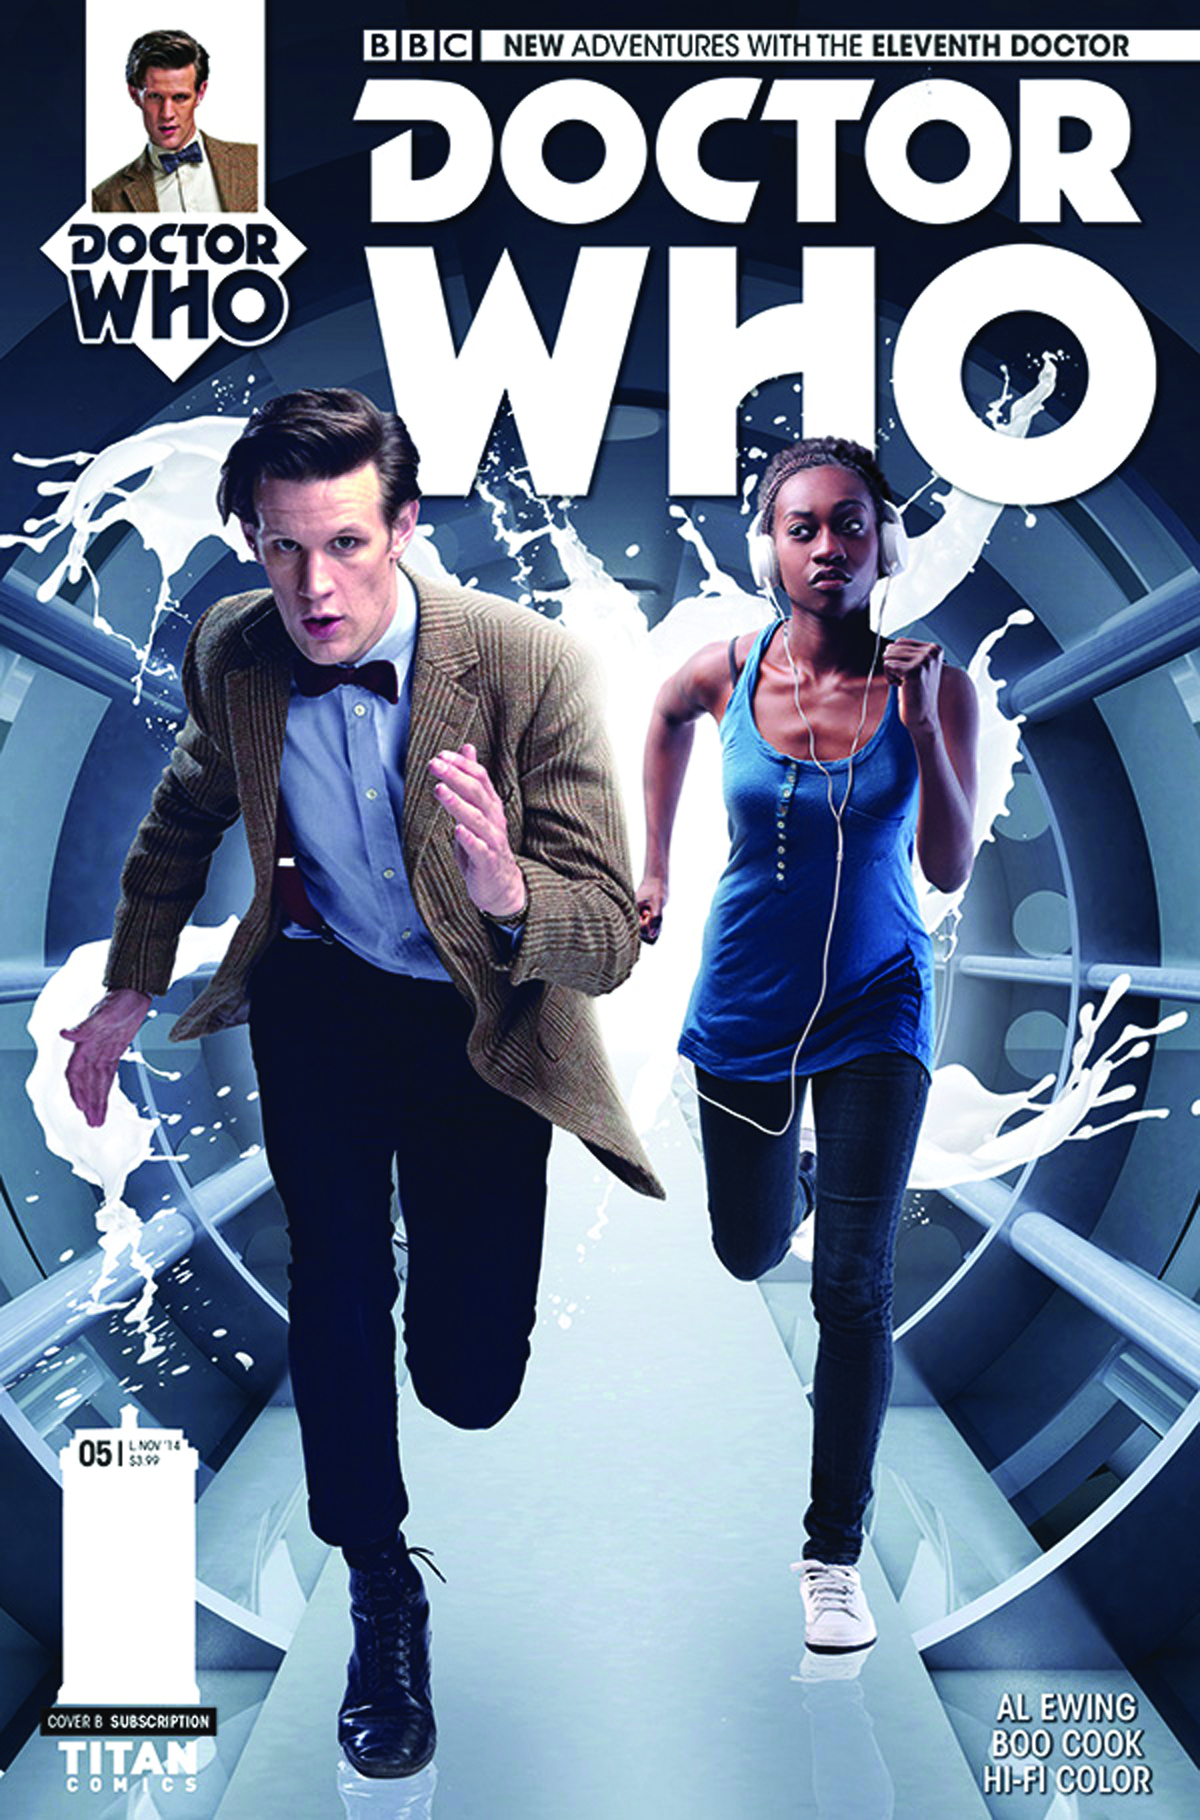 DOCTOR WHO 11TH #5 SUBSCRIPTION PHOTO